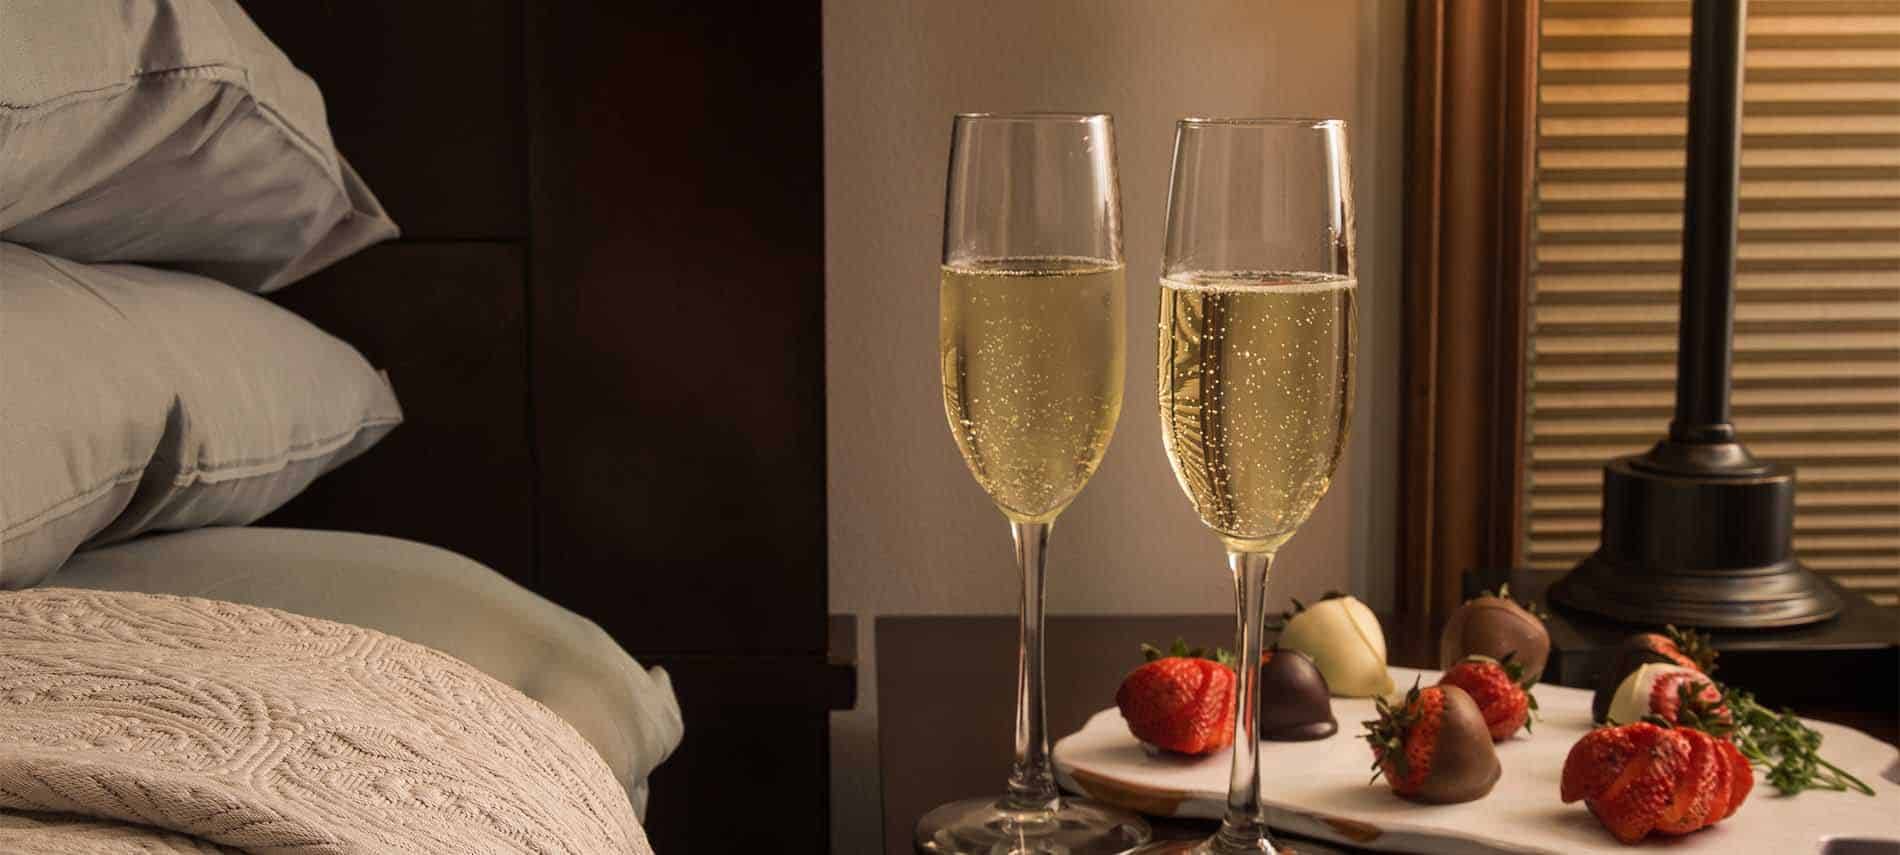 Champagne glasses filled with gently bubbling liquid, next to chocolate covered strawberries on a bedside table.